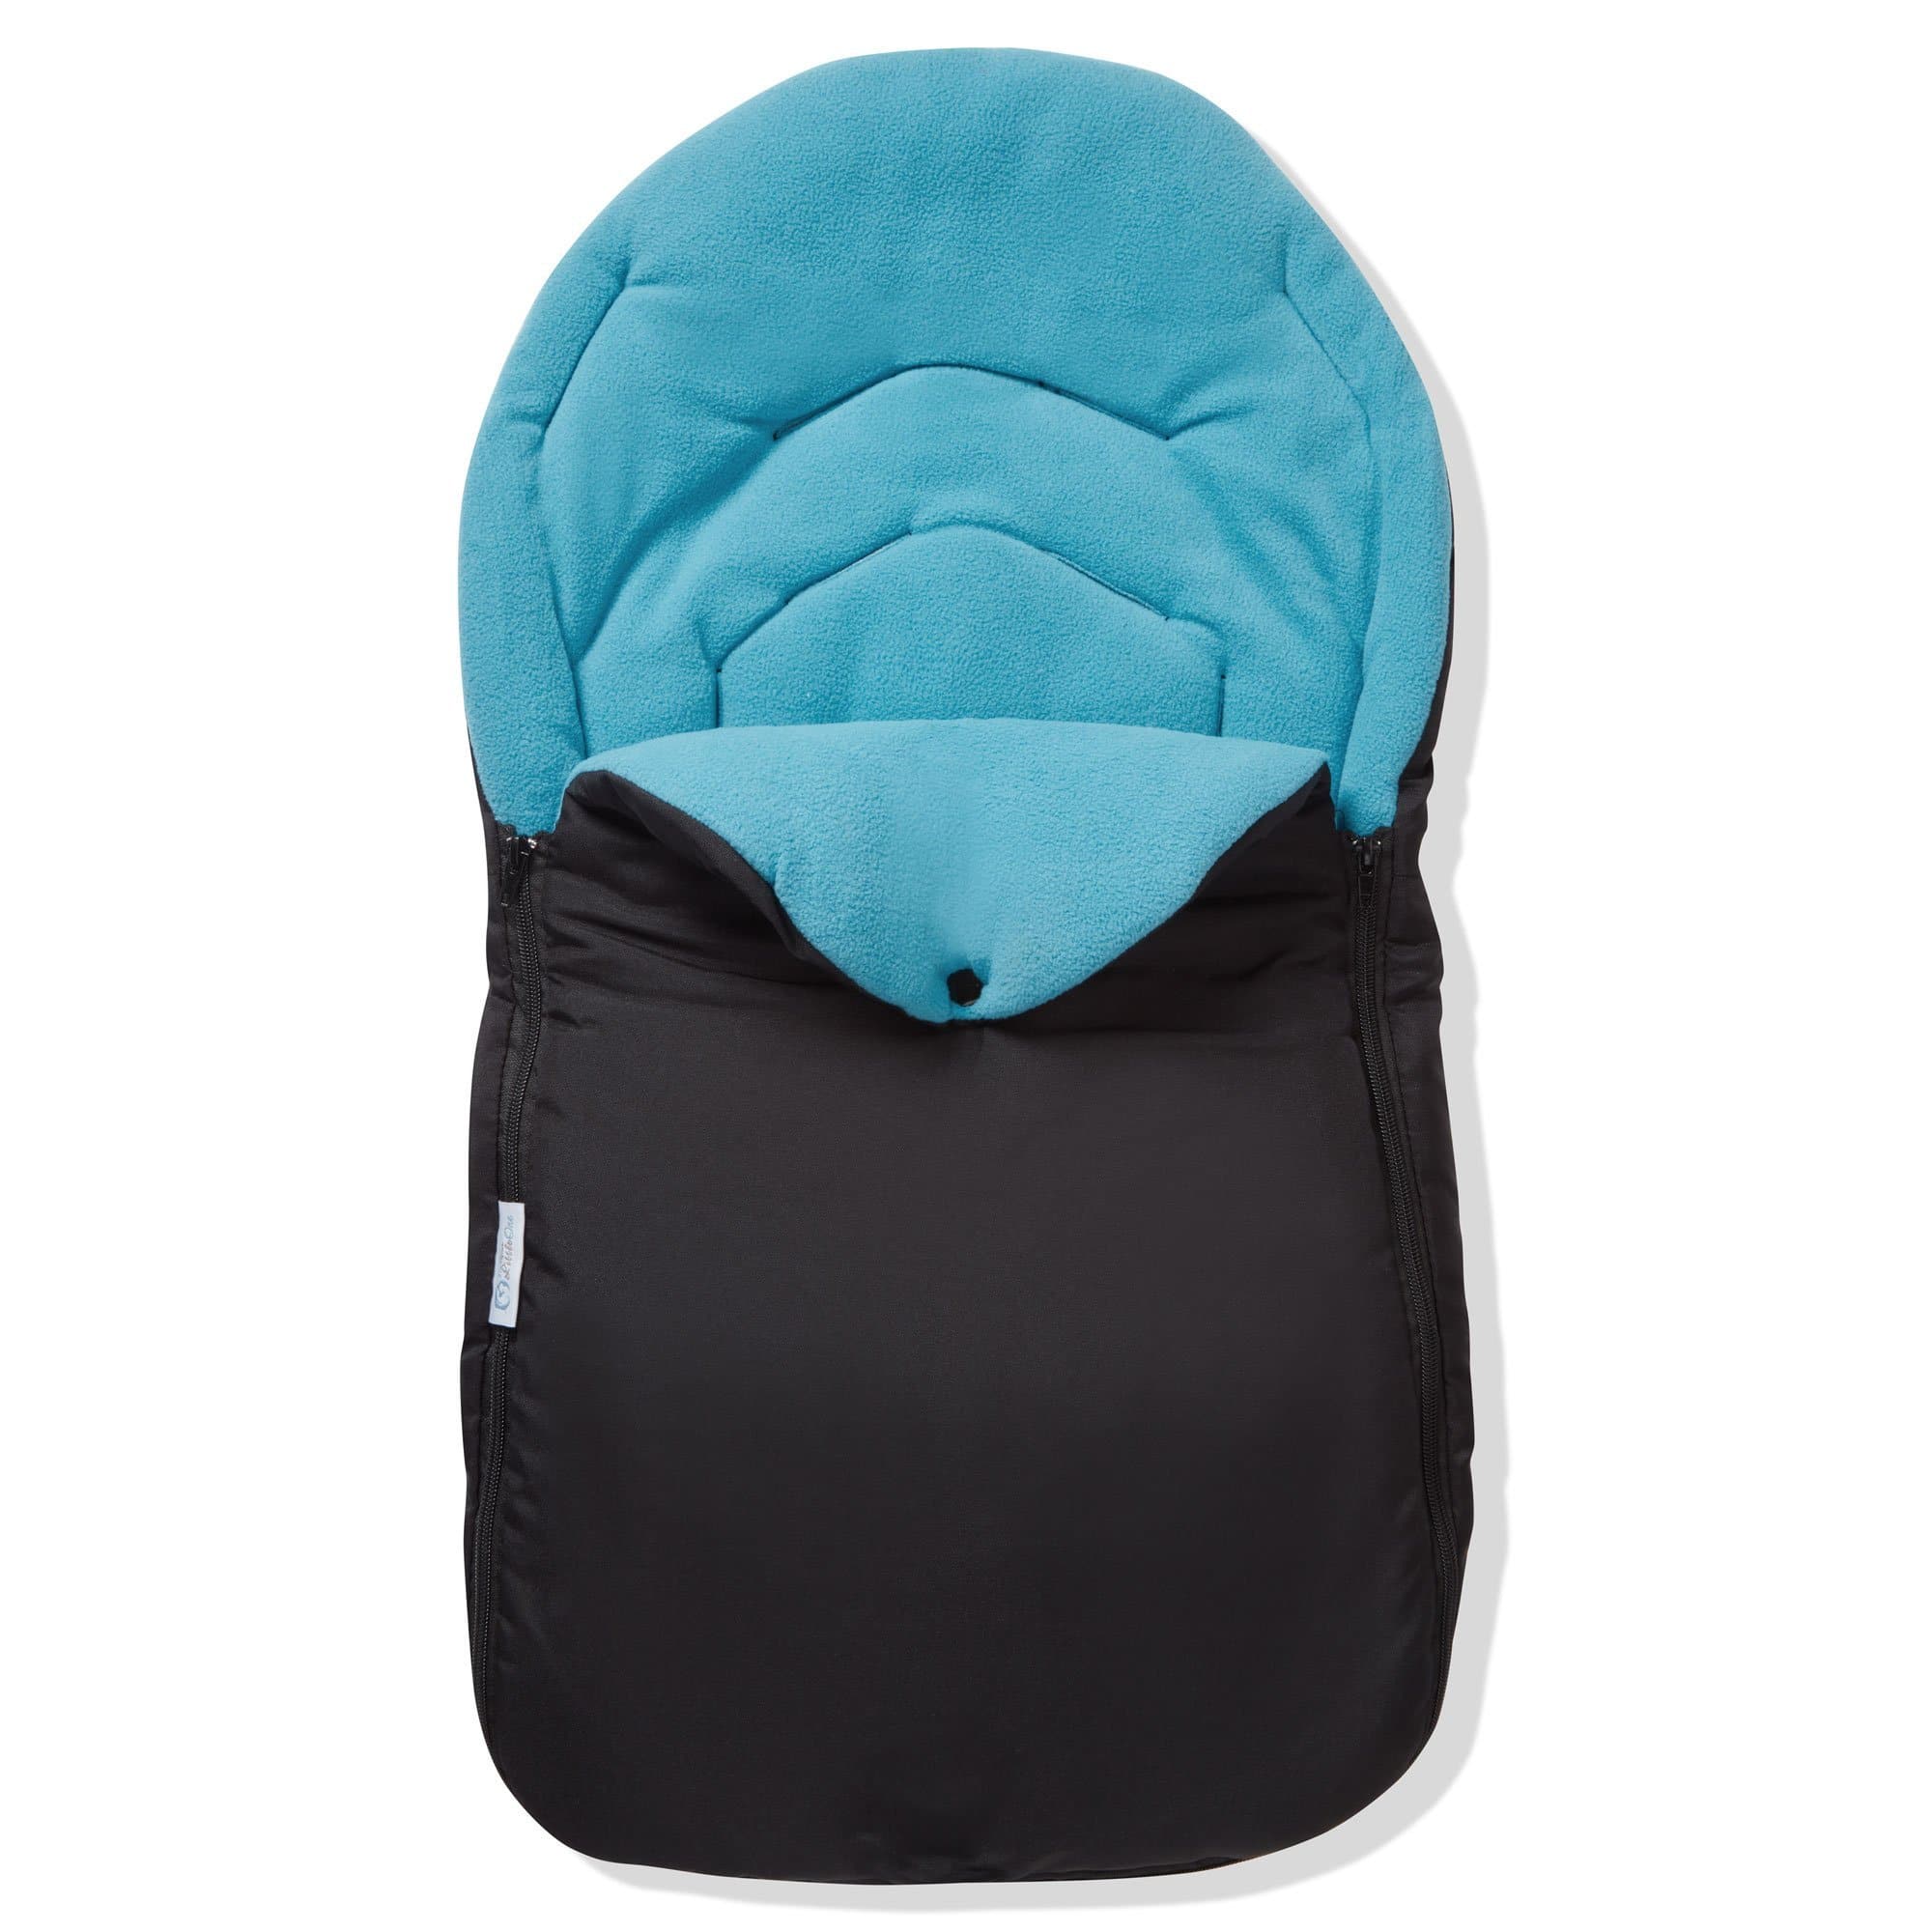 Car Seat Footmuff / Cosy Toes Compatible with Britax - Turquoise / Fits All Models | For Your Little One